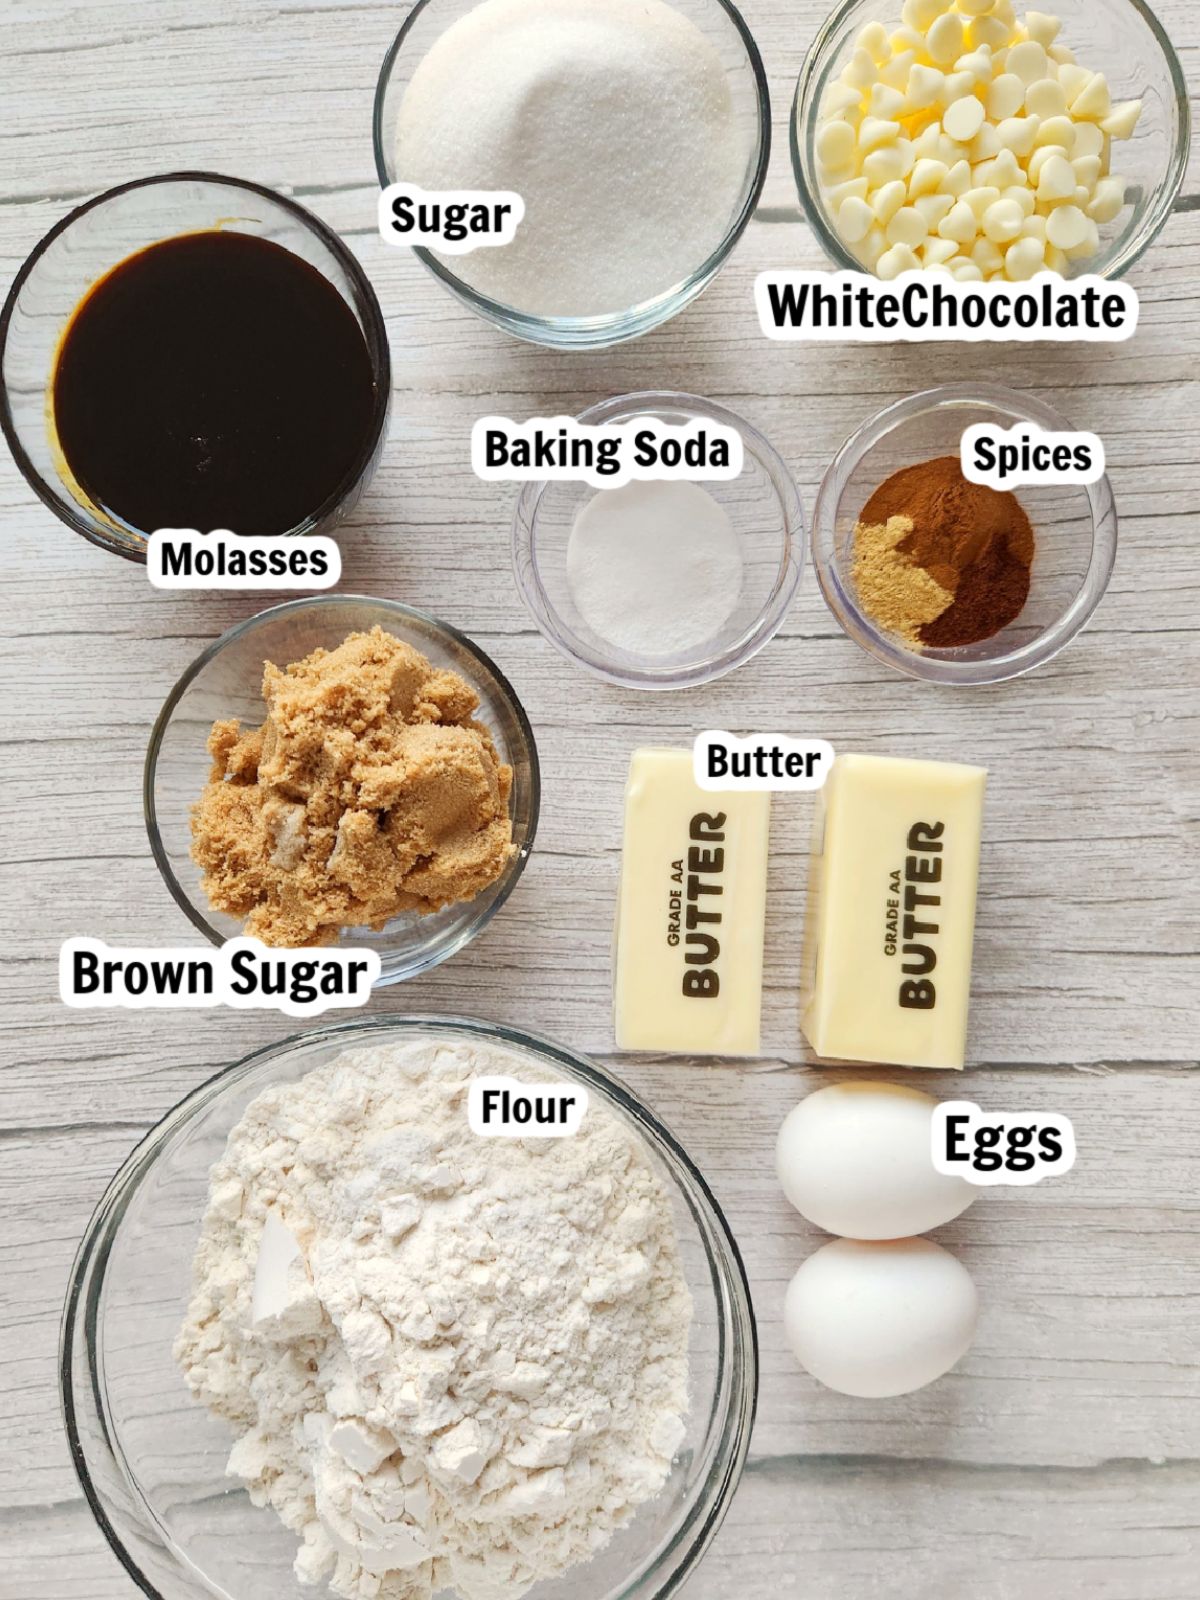 Ingredients for Gingerbread Cookie Recipe.